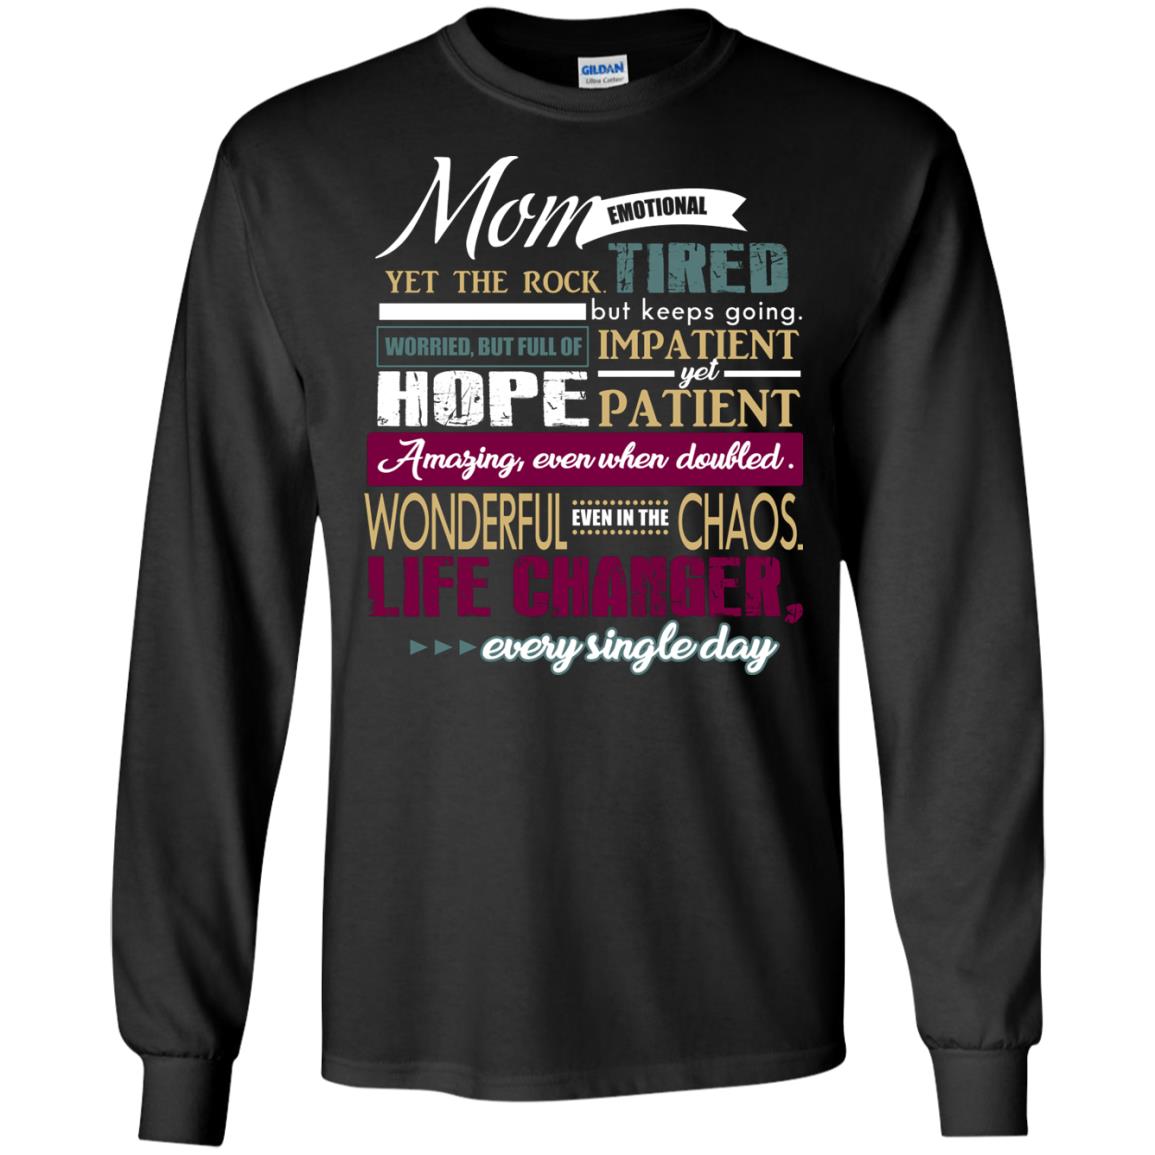 Mom Emotional Yet The Rock  Tired But Keeps Going Worried But Full Of Impatient Yet Hpoe Patient Amazing Even When Doubled Mommy ShirtG240 Gildan LS Ultra Cotton T-Shirt